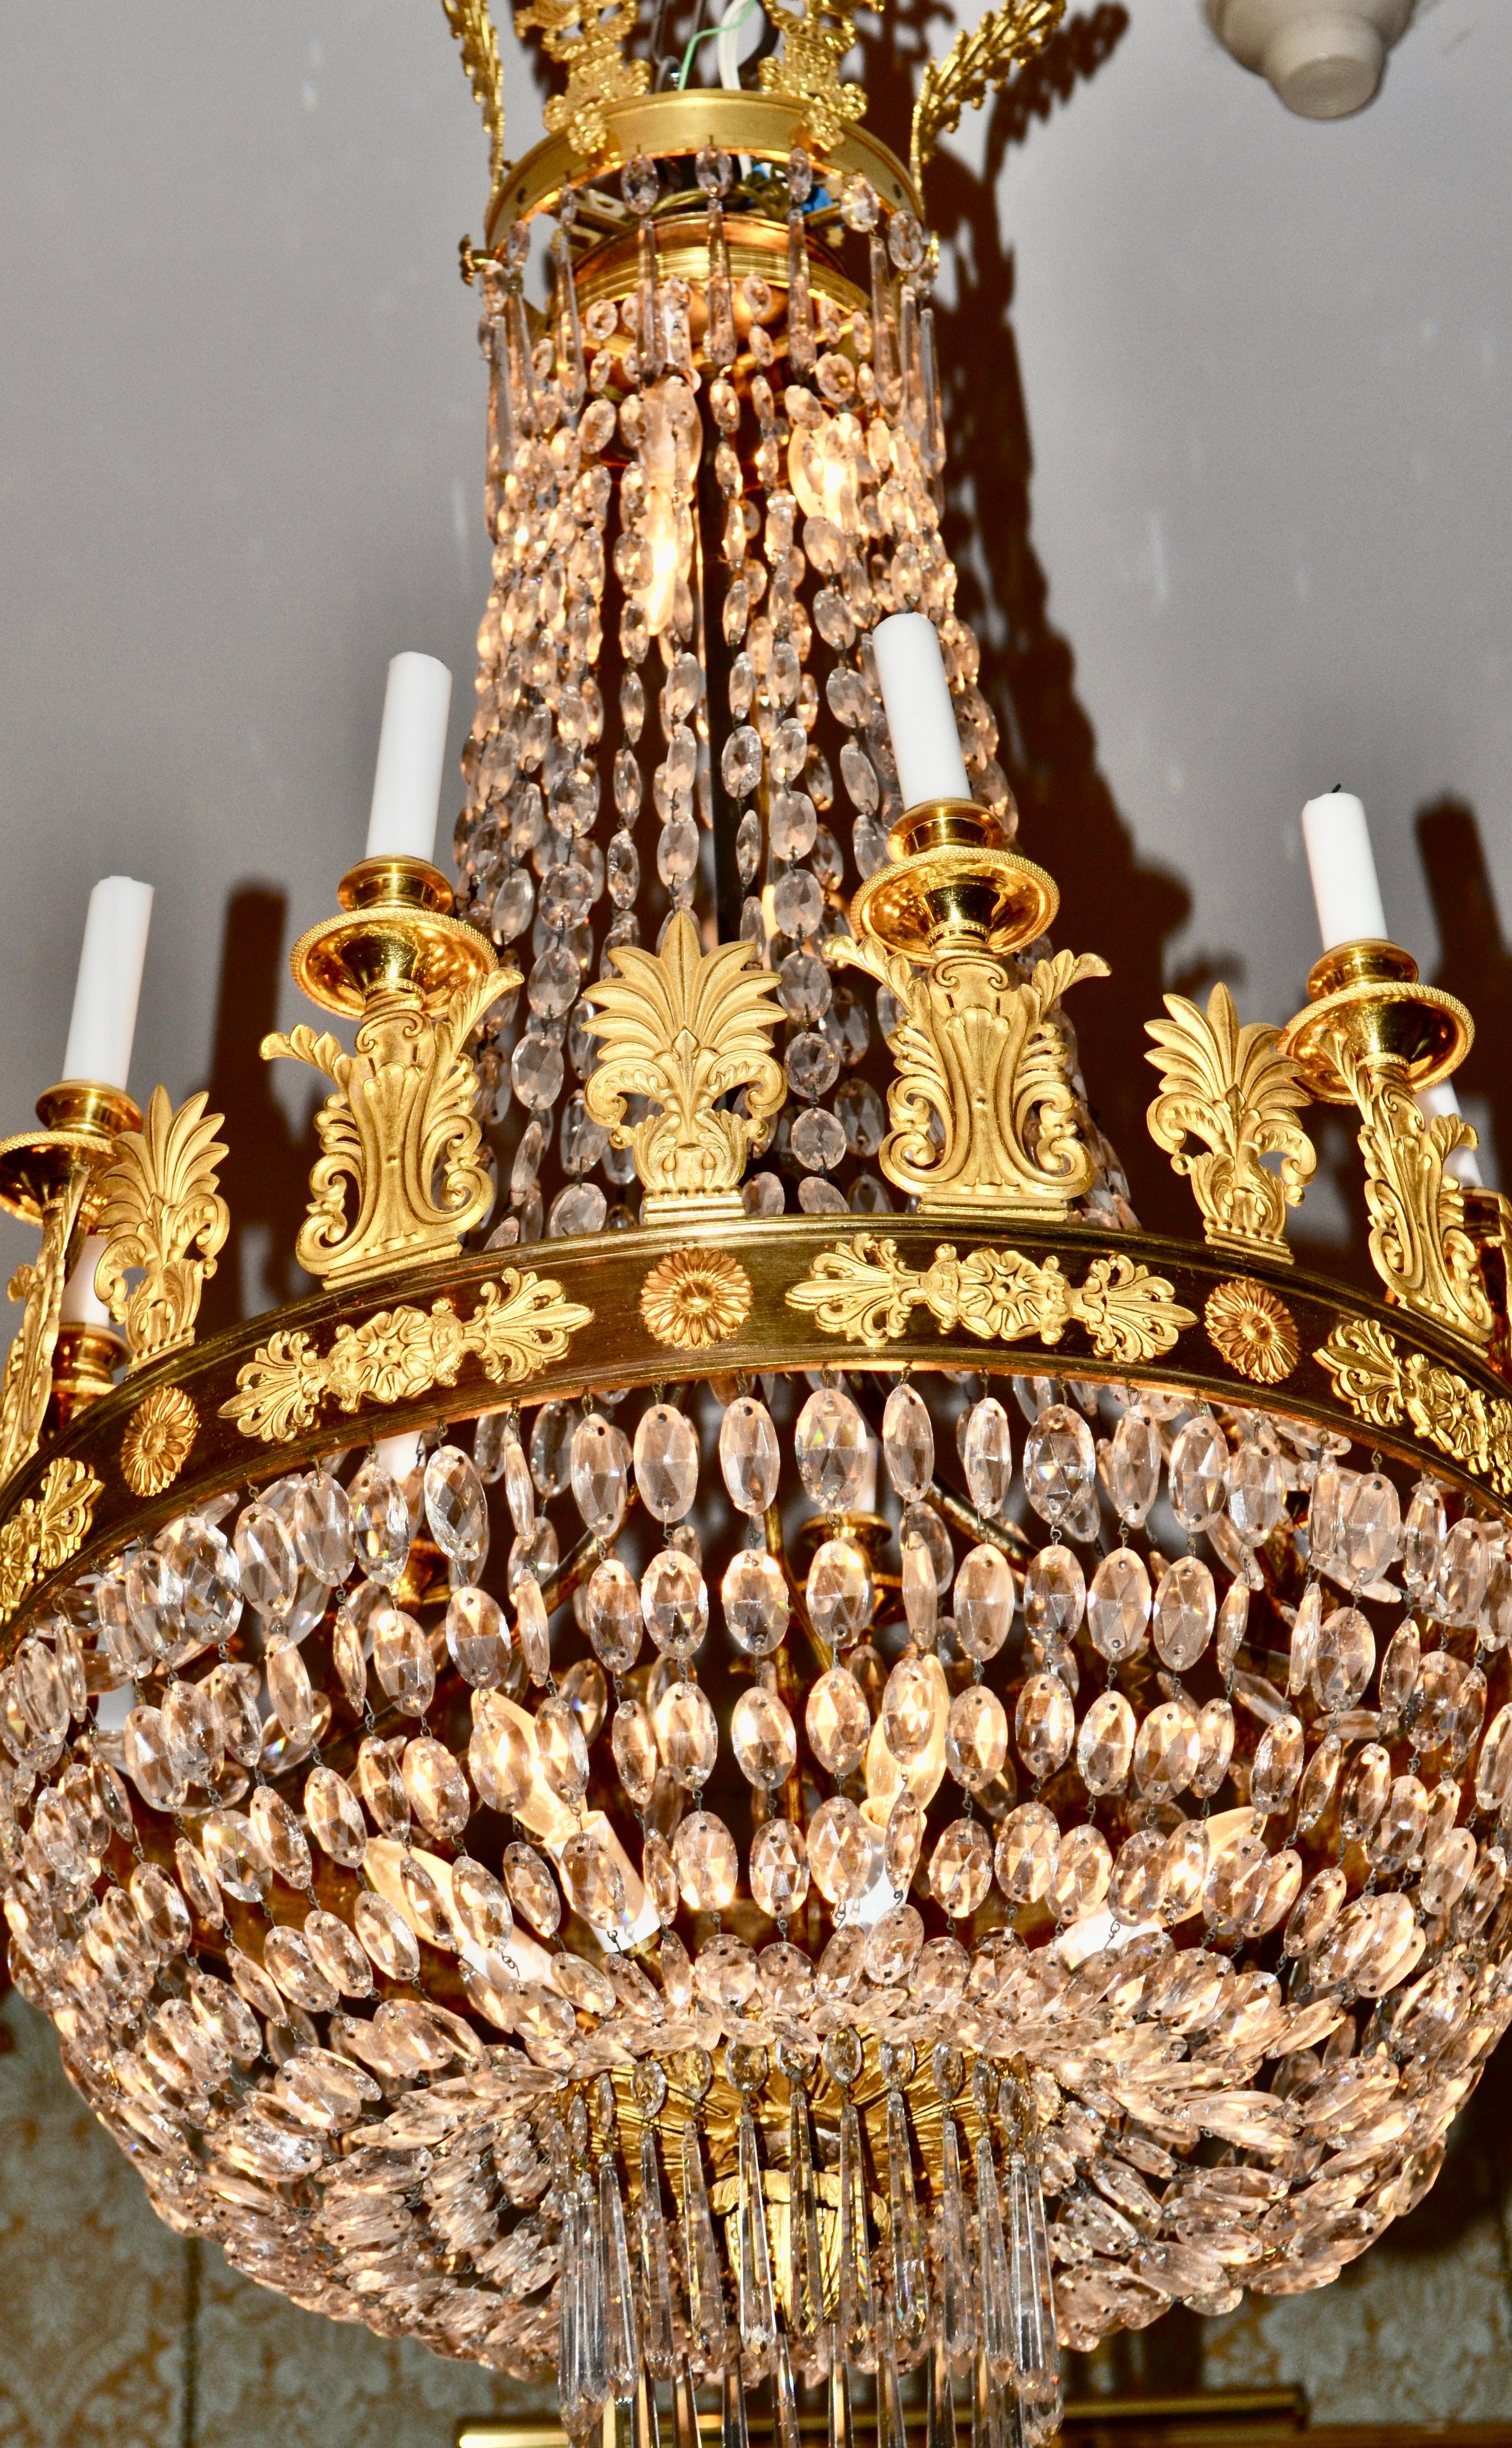 Early 19th Century French Empire Gilt Bronze and Crystal Basket Chandelier For Sale 8